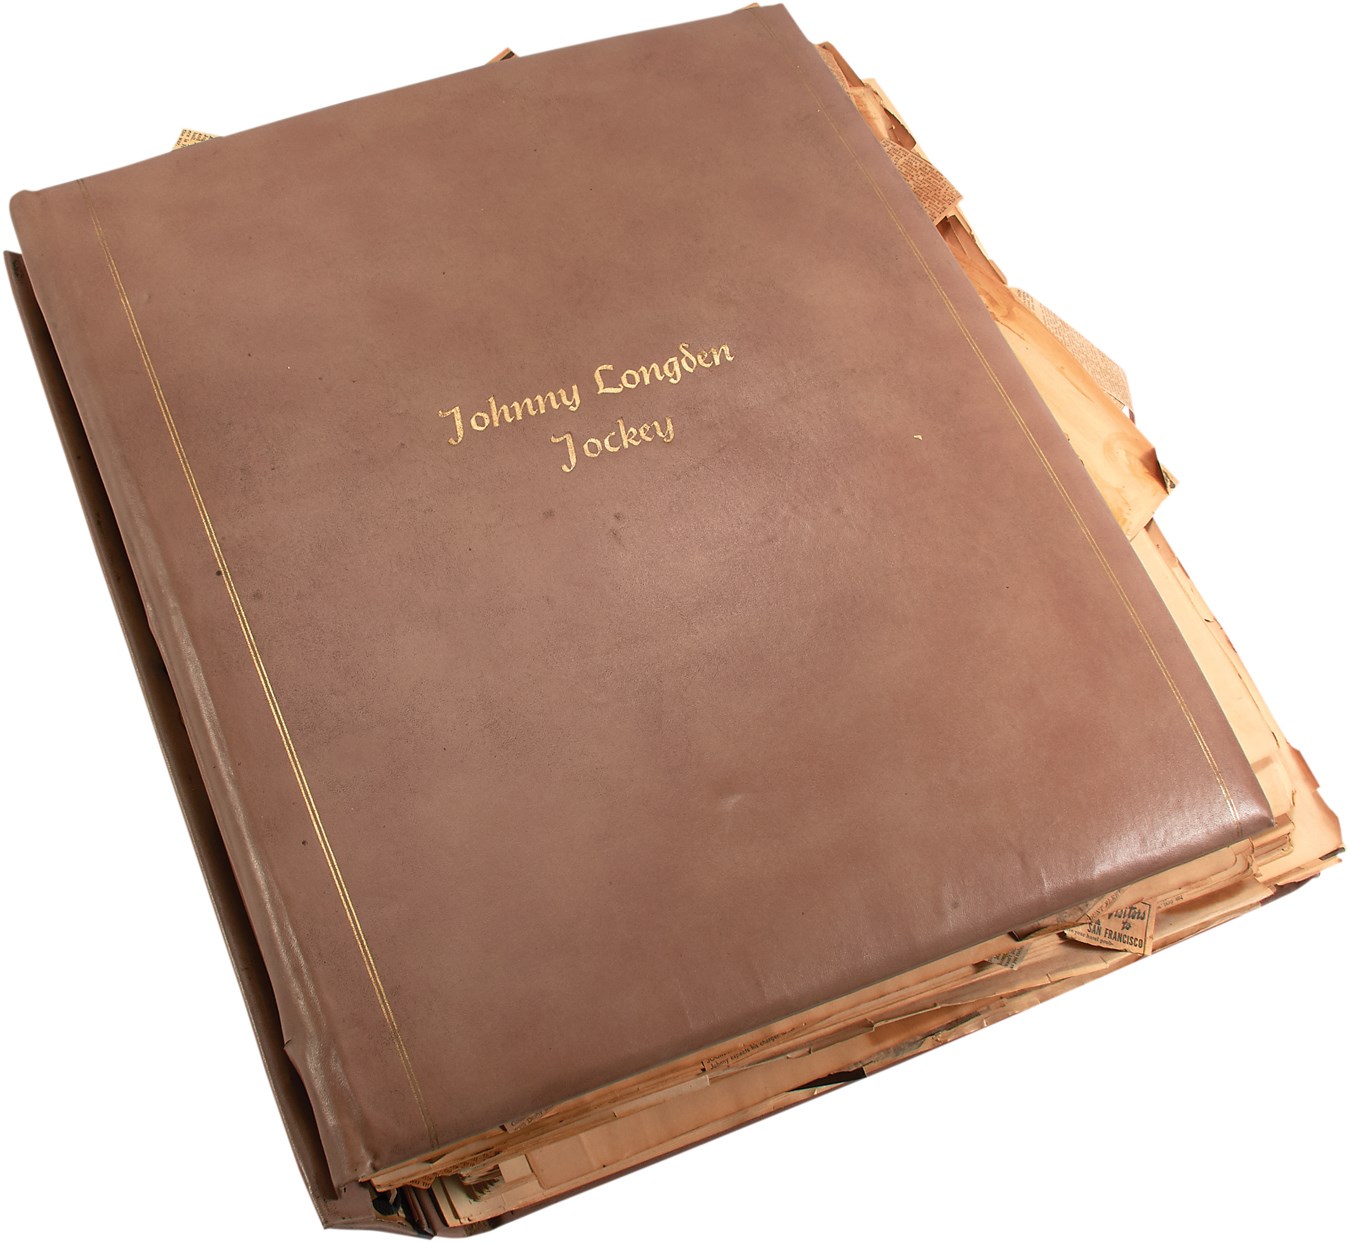 - Johnny Longden's Personal Hall of Fame Scrapbook (57lbs.)